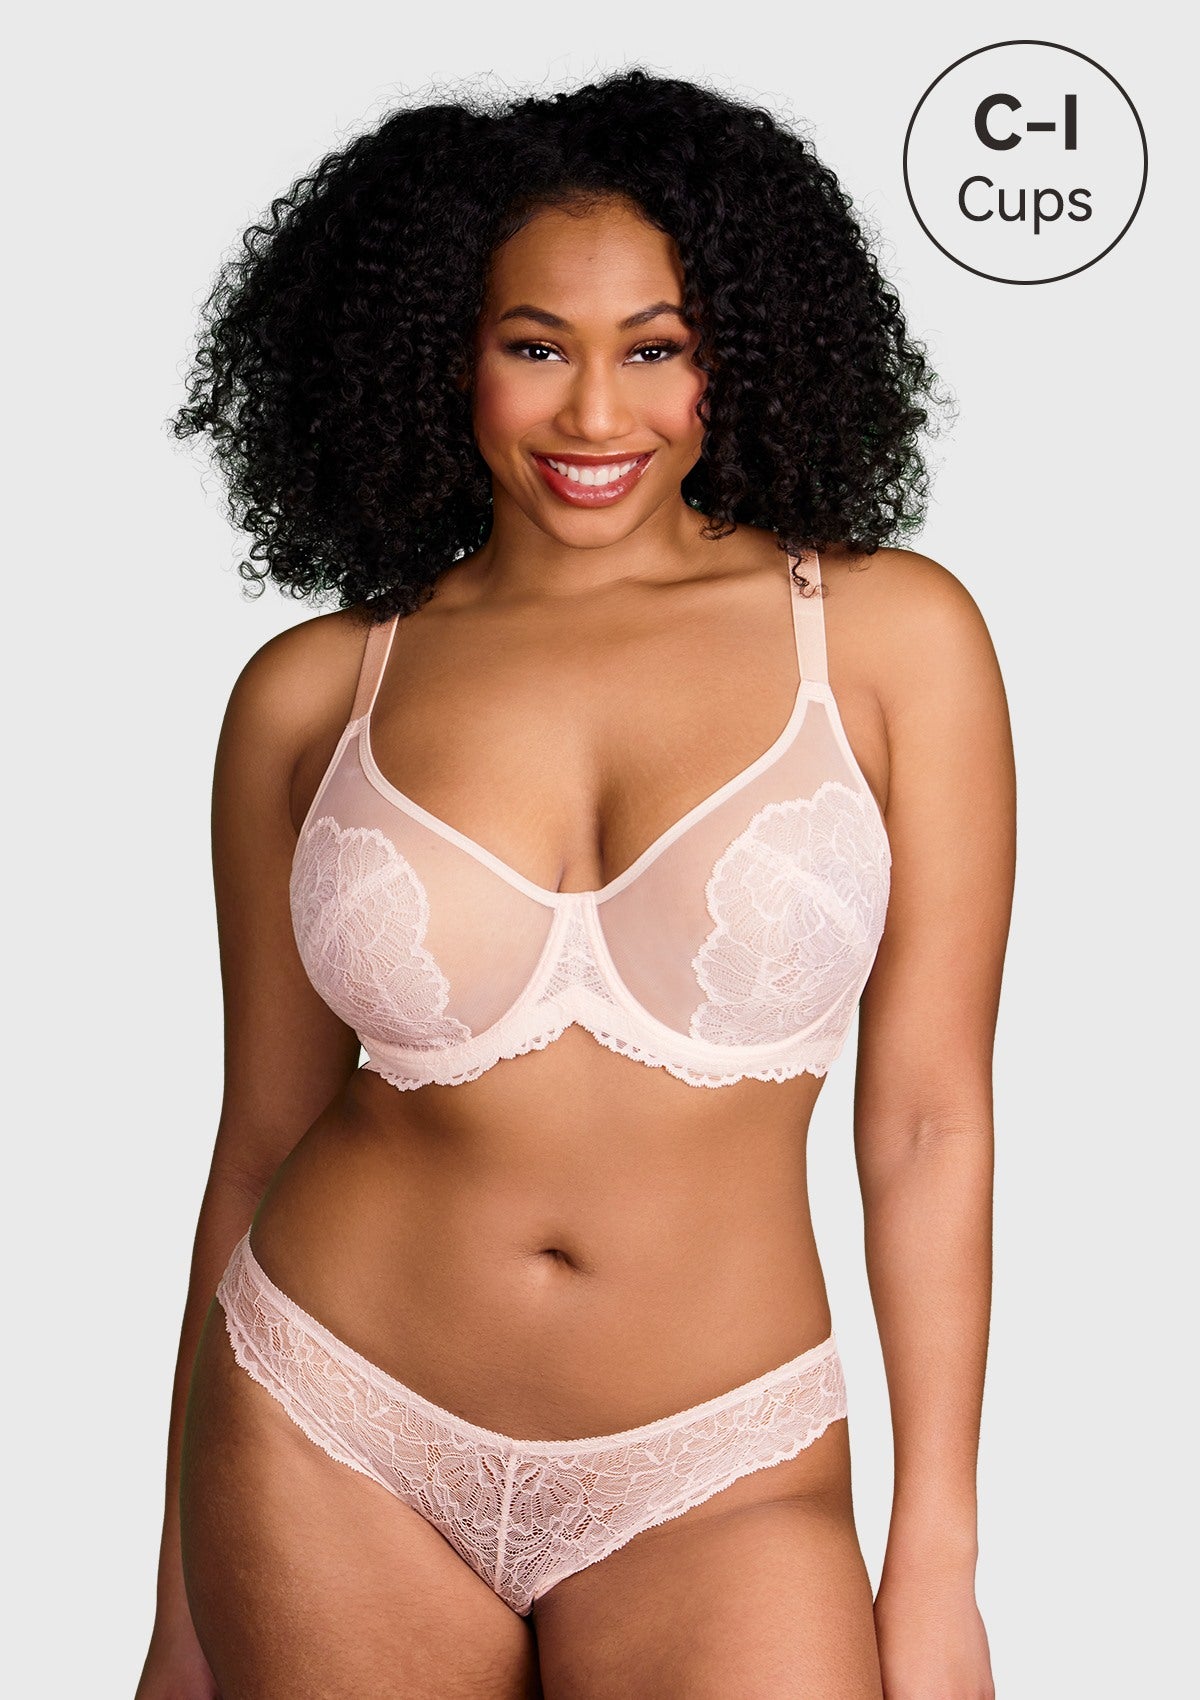 HSIA Blossom Sheer Lace Bra: Comfortable Underwire Bra For Big Busts - Dusty Peach / 44 / C